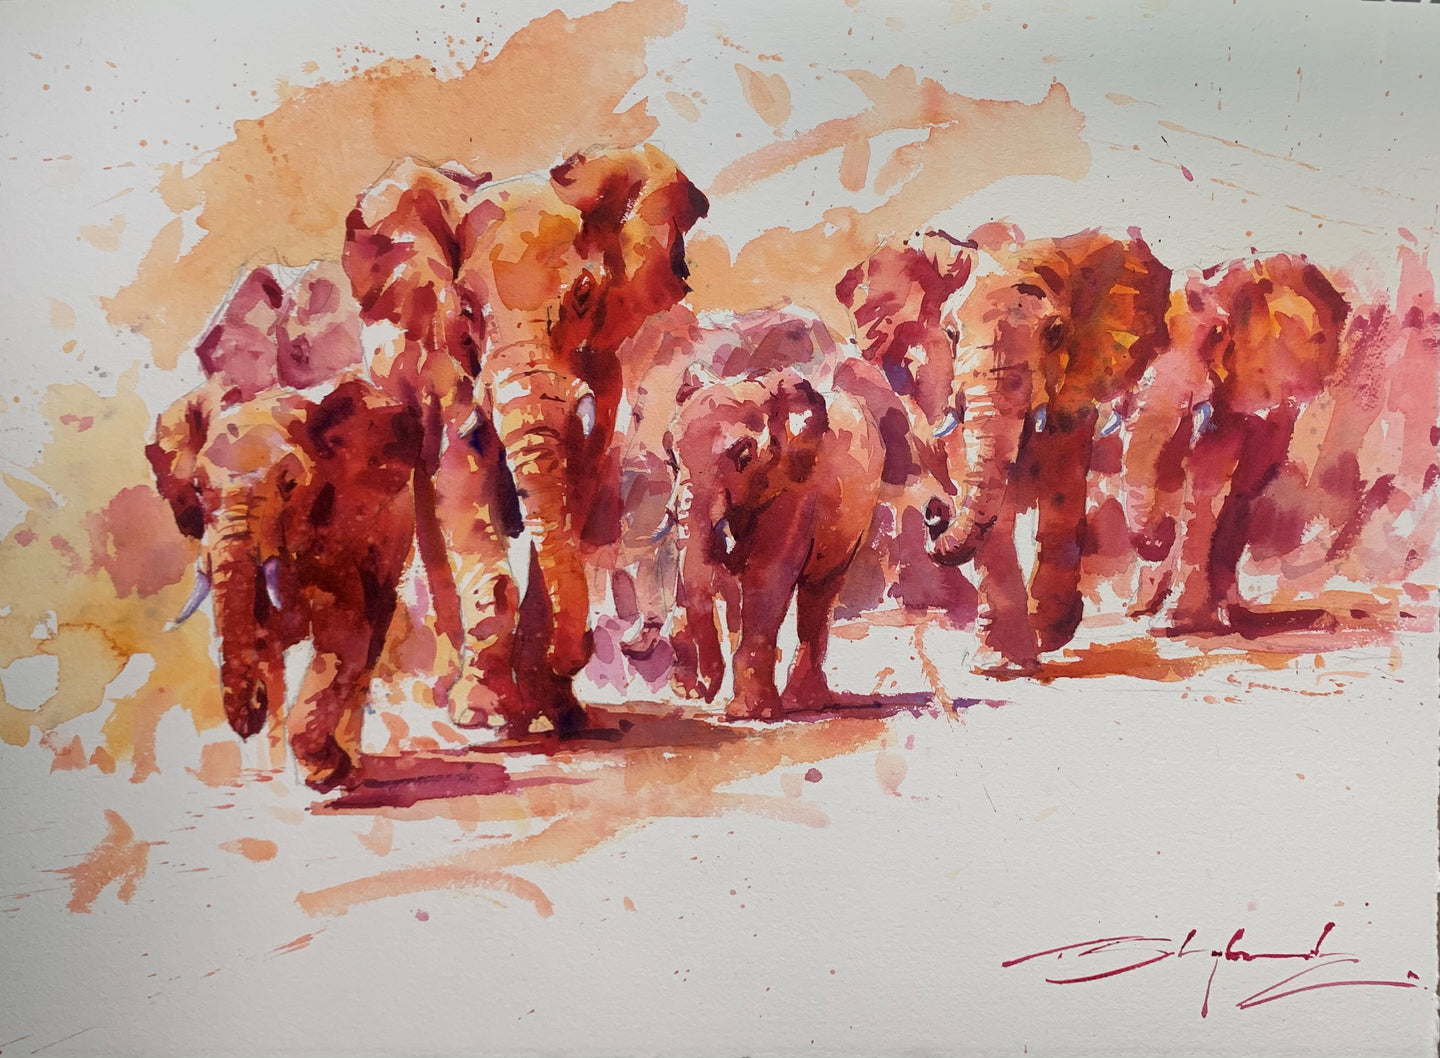 Herd of Elephants painted in watercolour with a warm, red palette, by brilliant wildlife painter Tom Shepherd